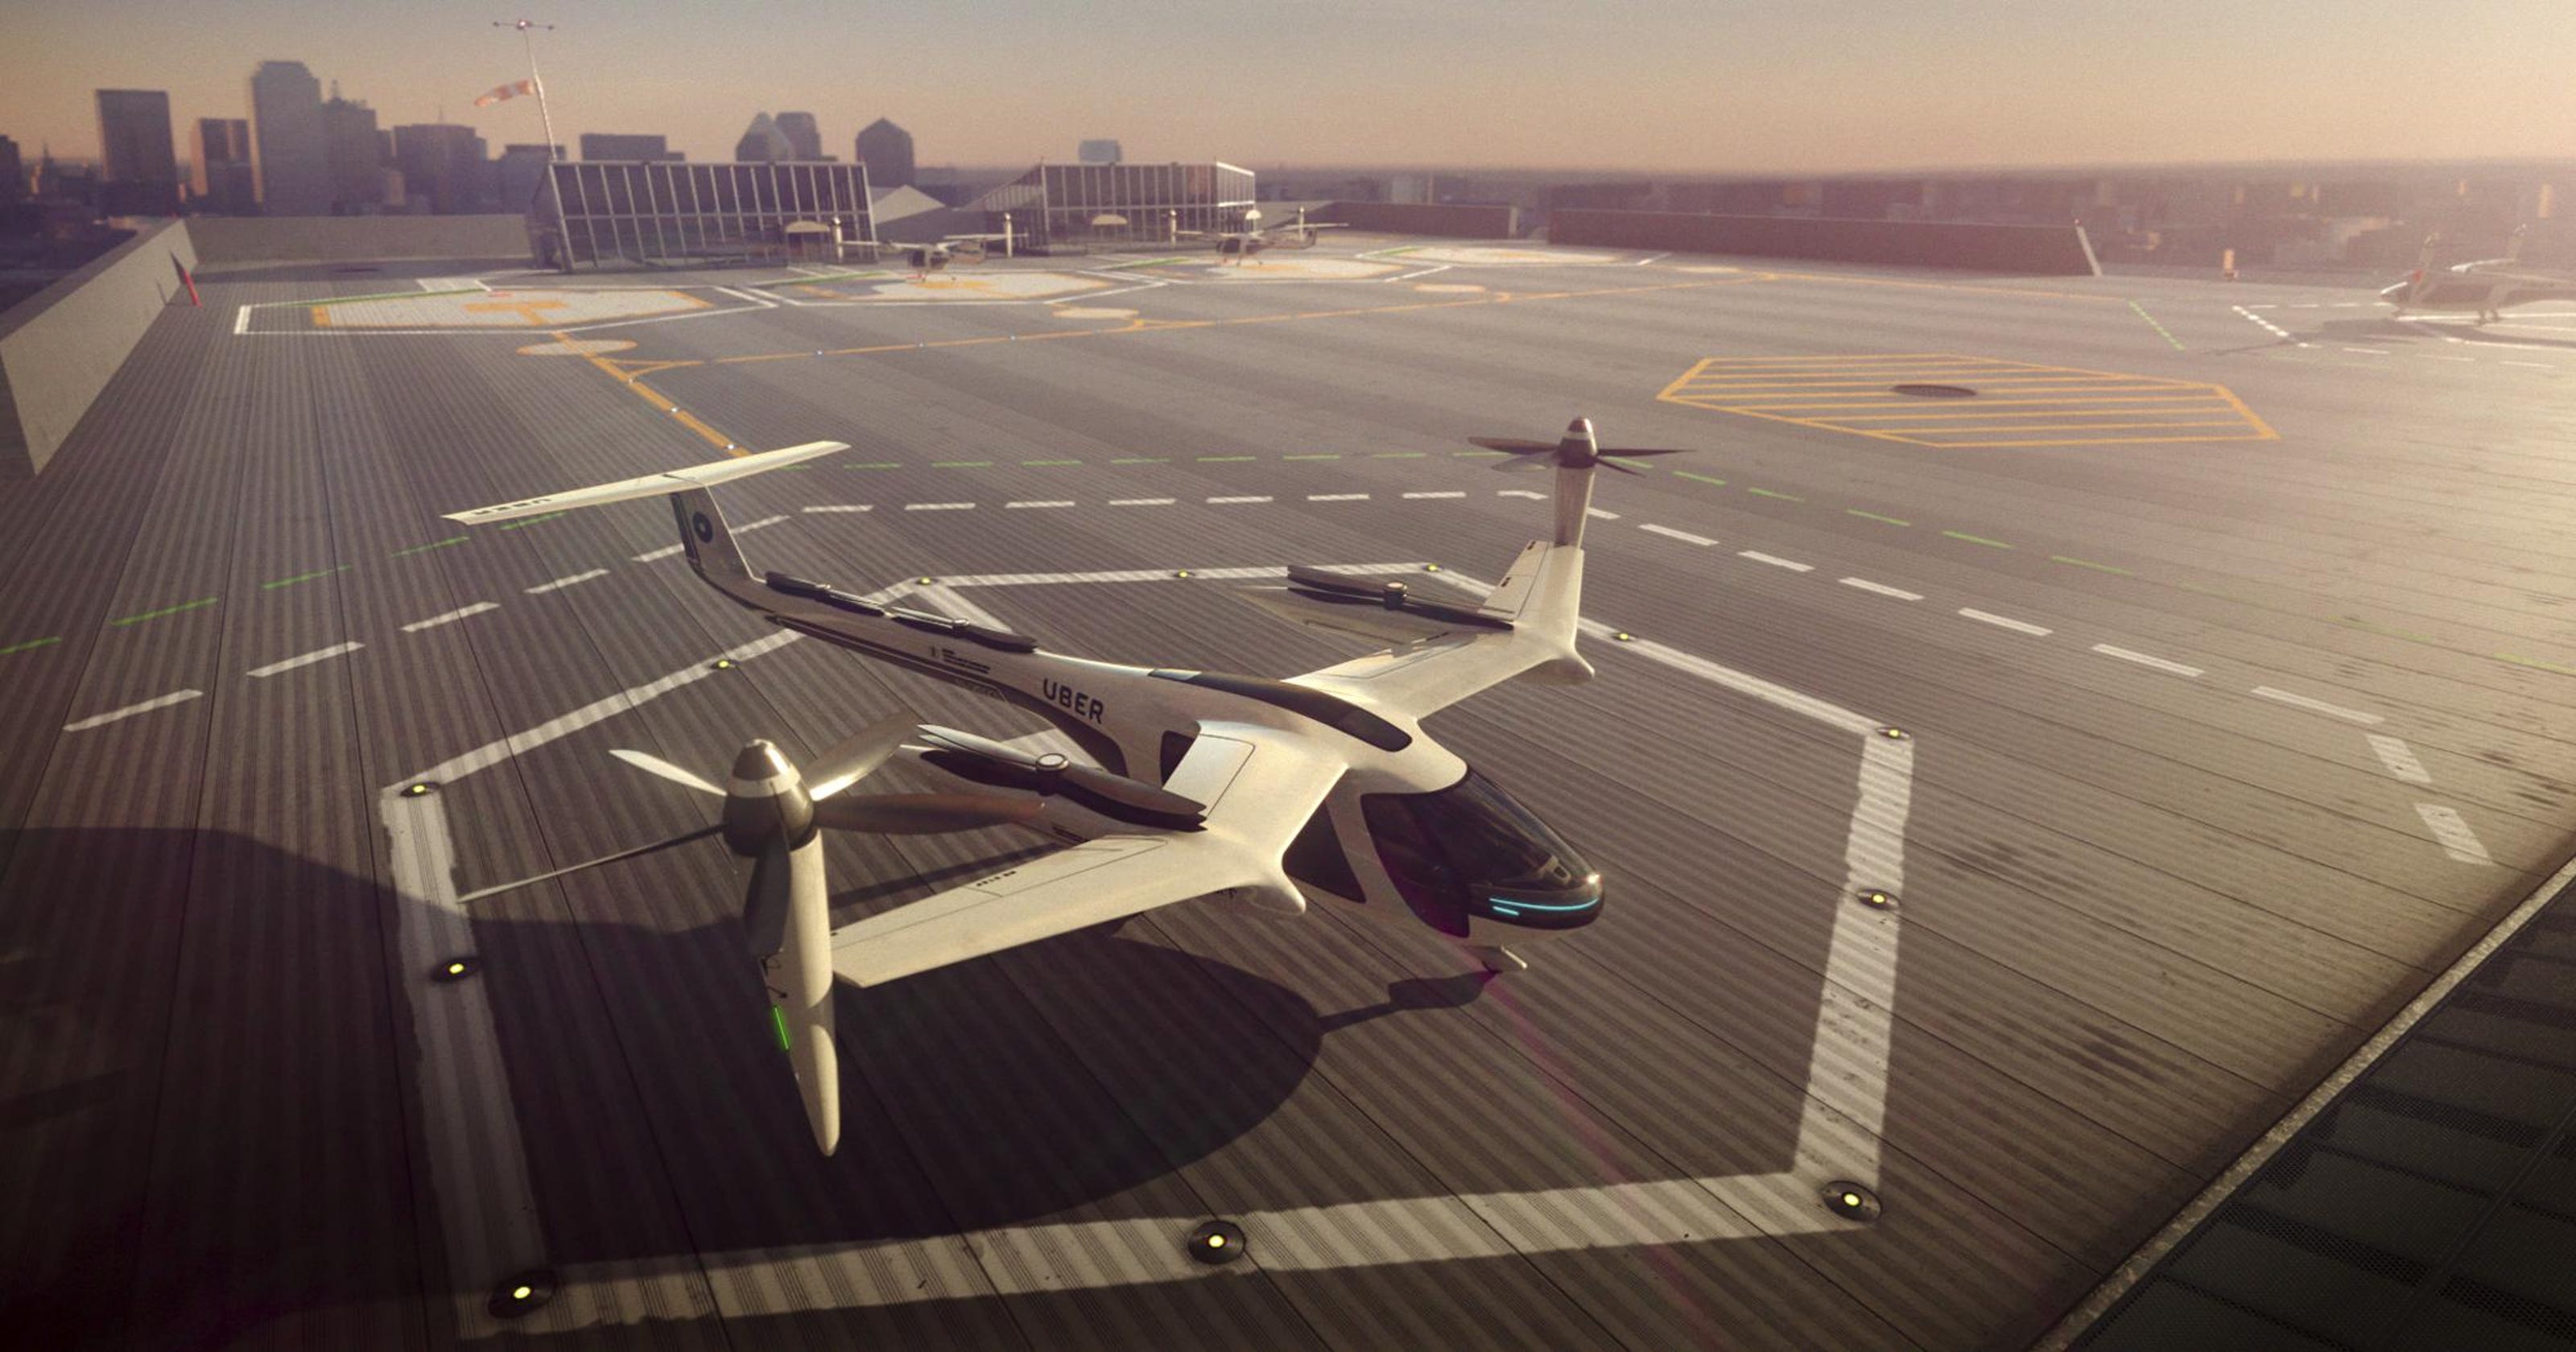 Opinion: Will Detroit lead the way on flying cars?